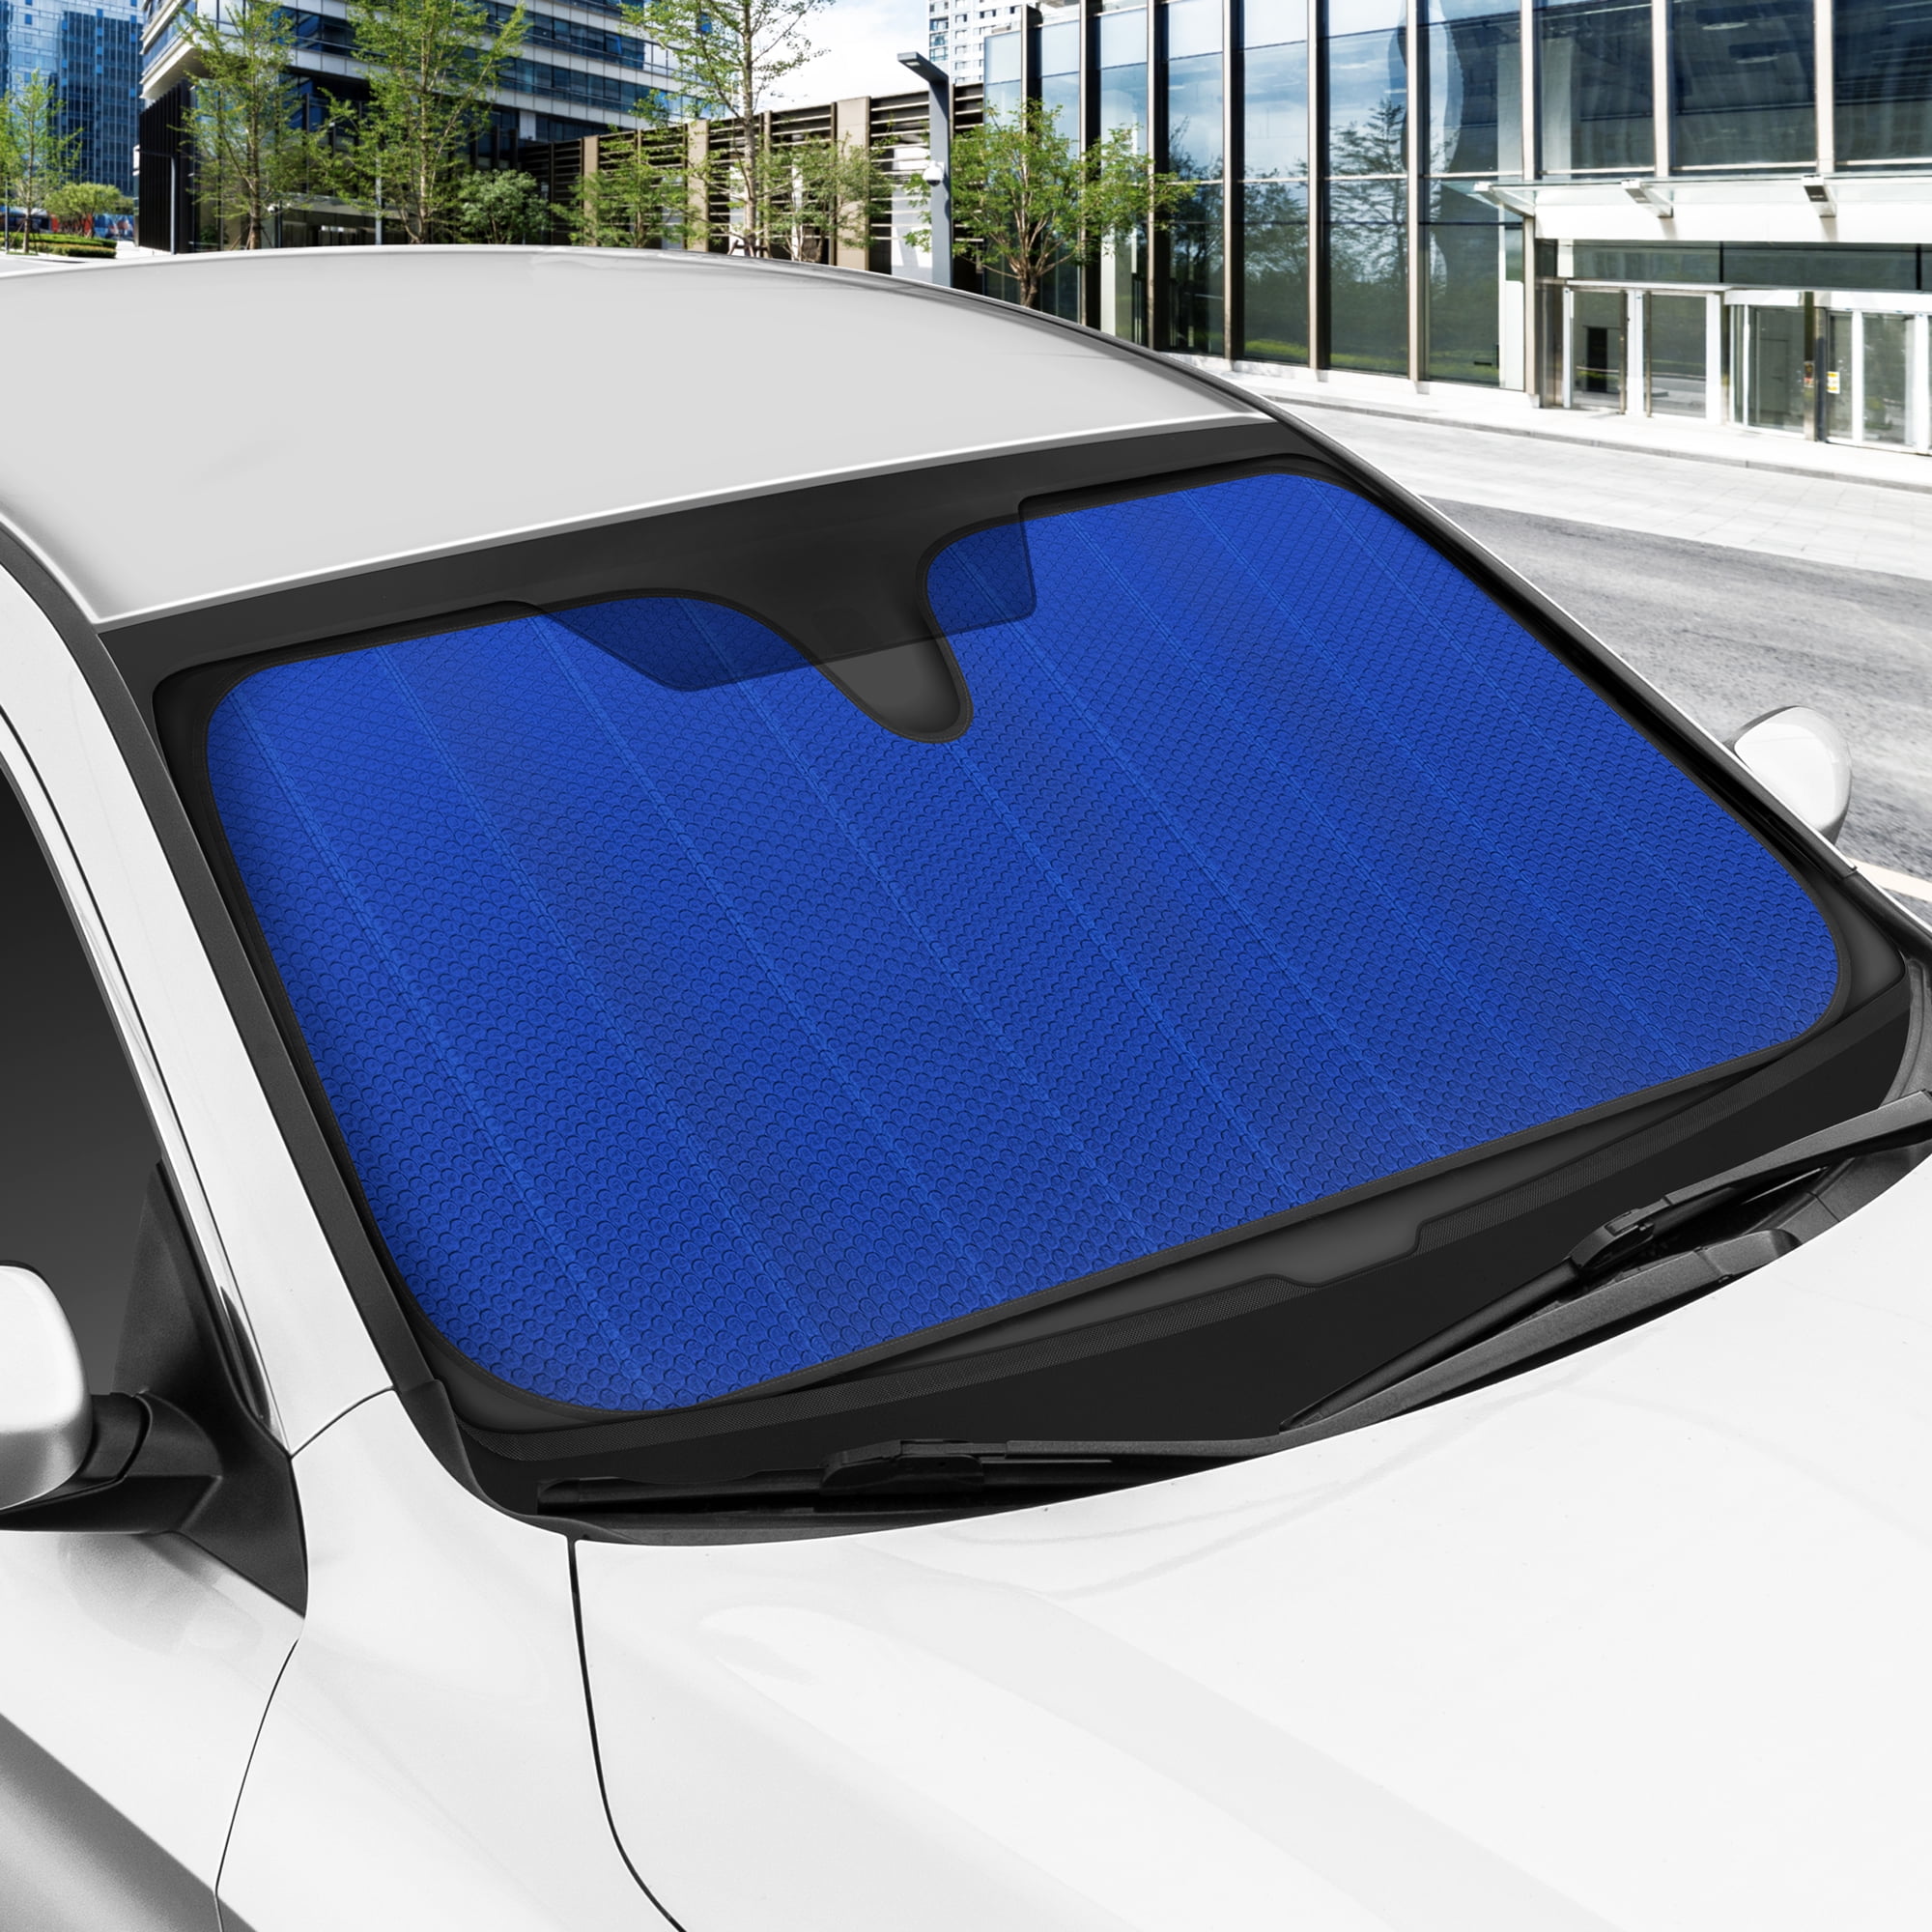 Motor Trend Front Windshield Sun Shade - Keeps Your Vehicle Cool